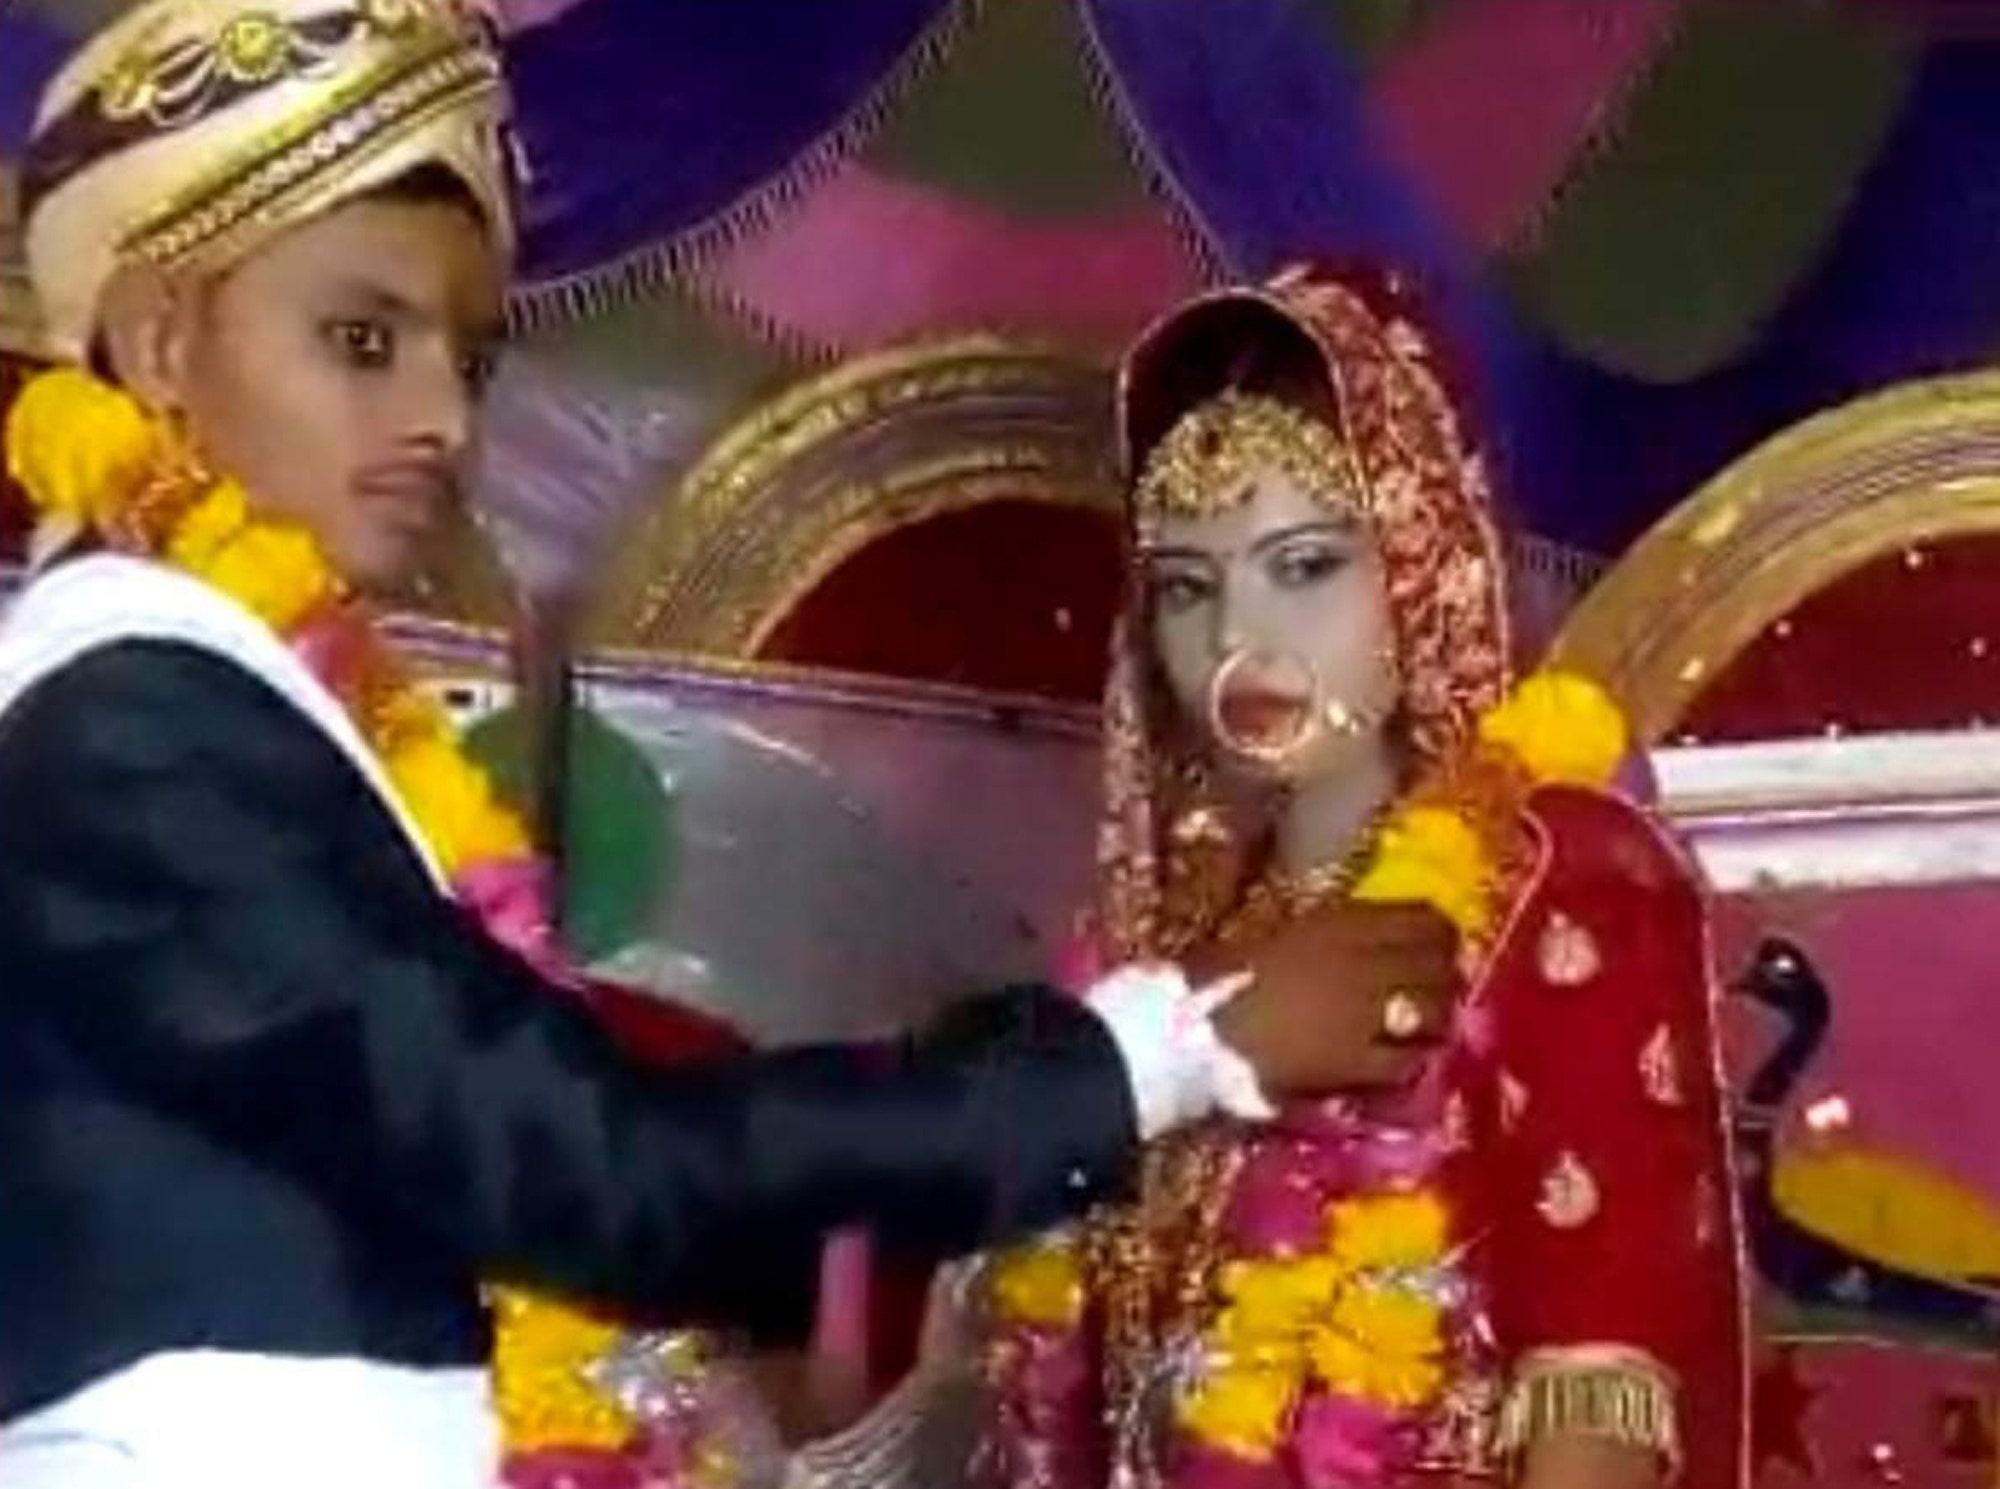 Bride dies of heart attack at her wedding in India, so groom reportedly marries sister